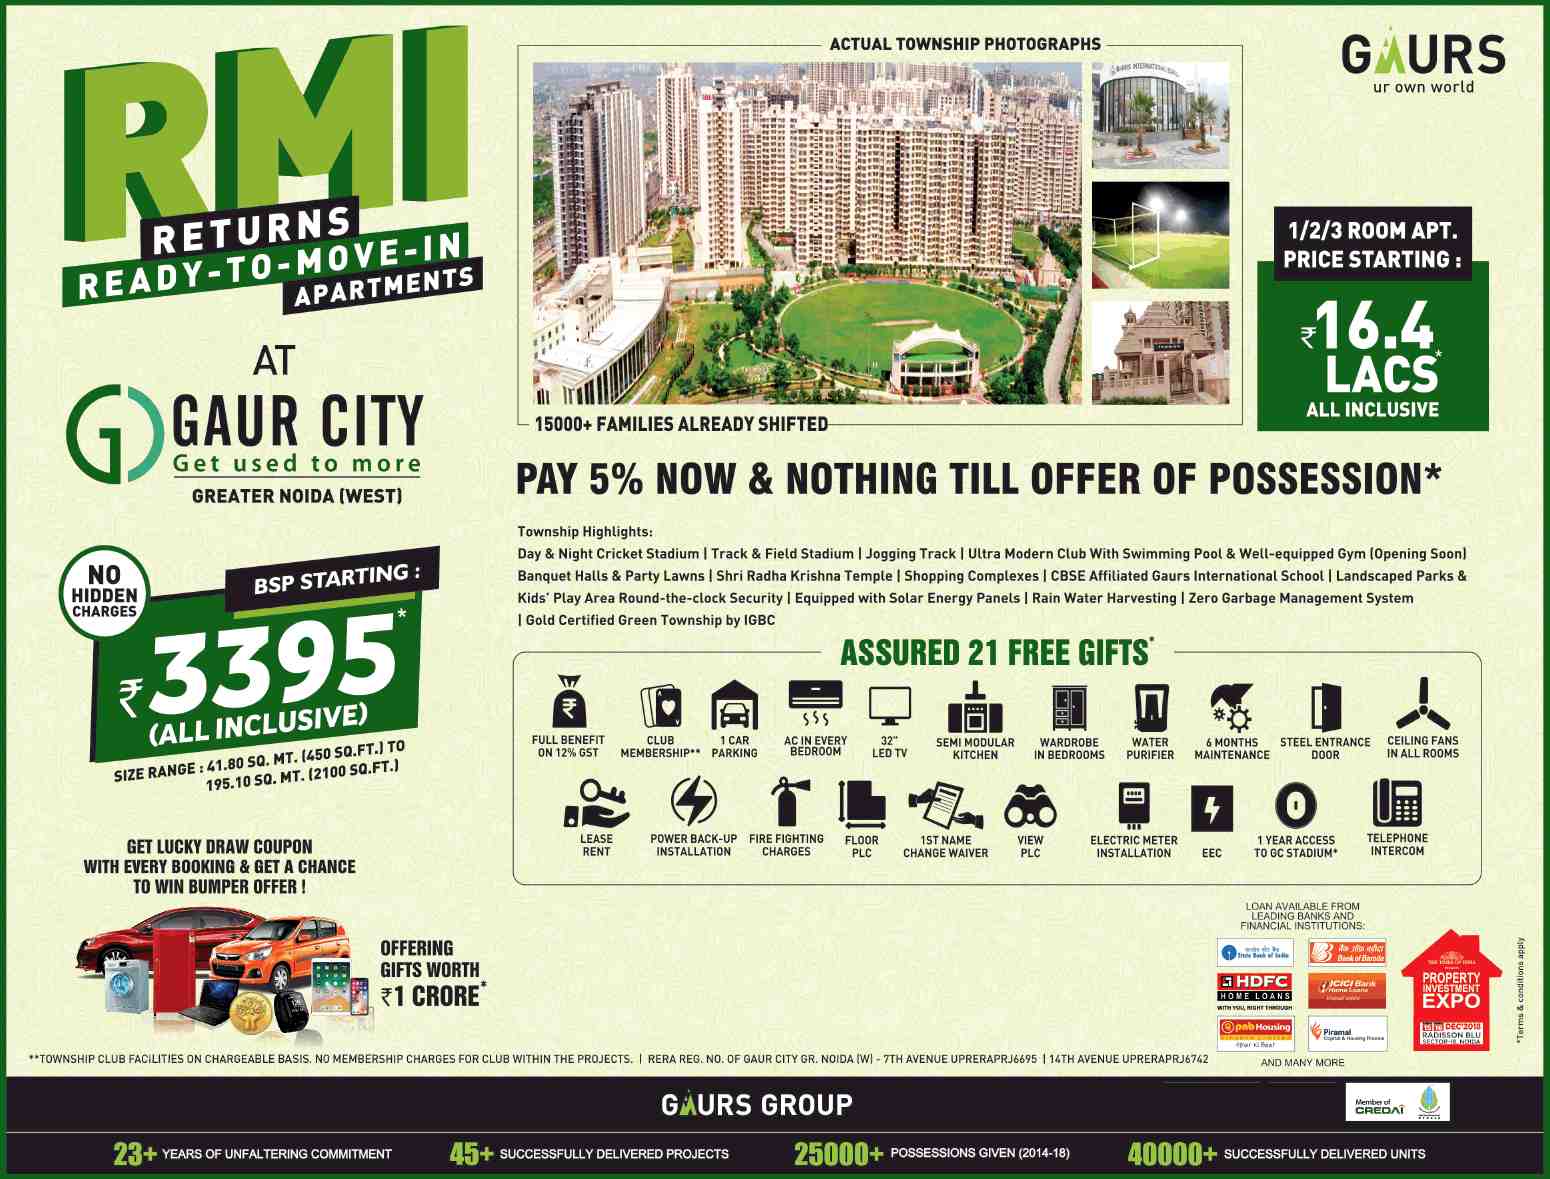 Pay 5% now and nothing till possession at Gaur City in Greater Noida Update